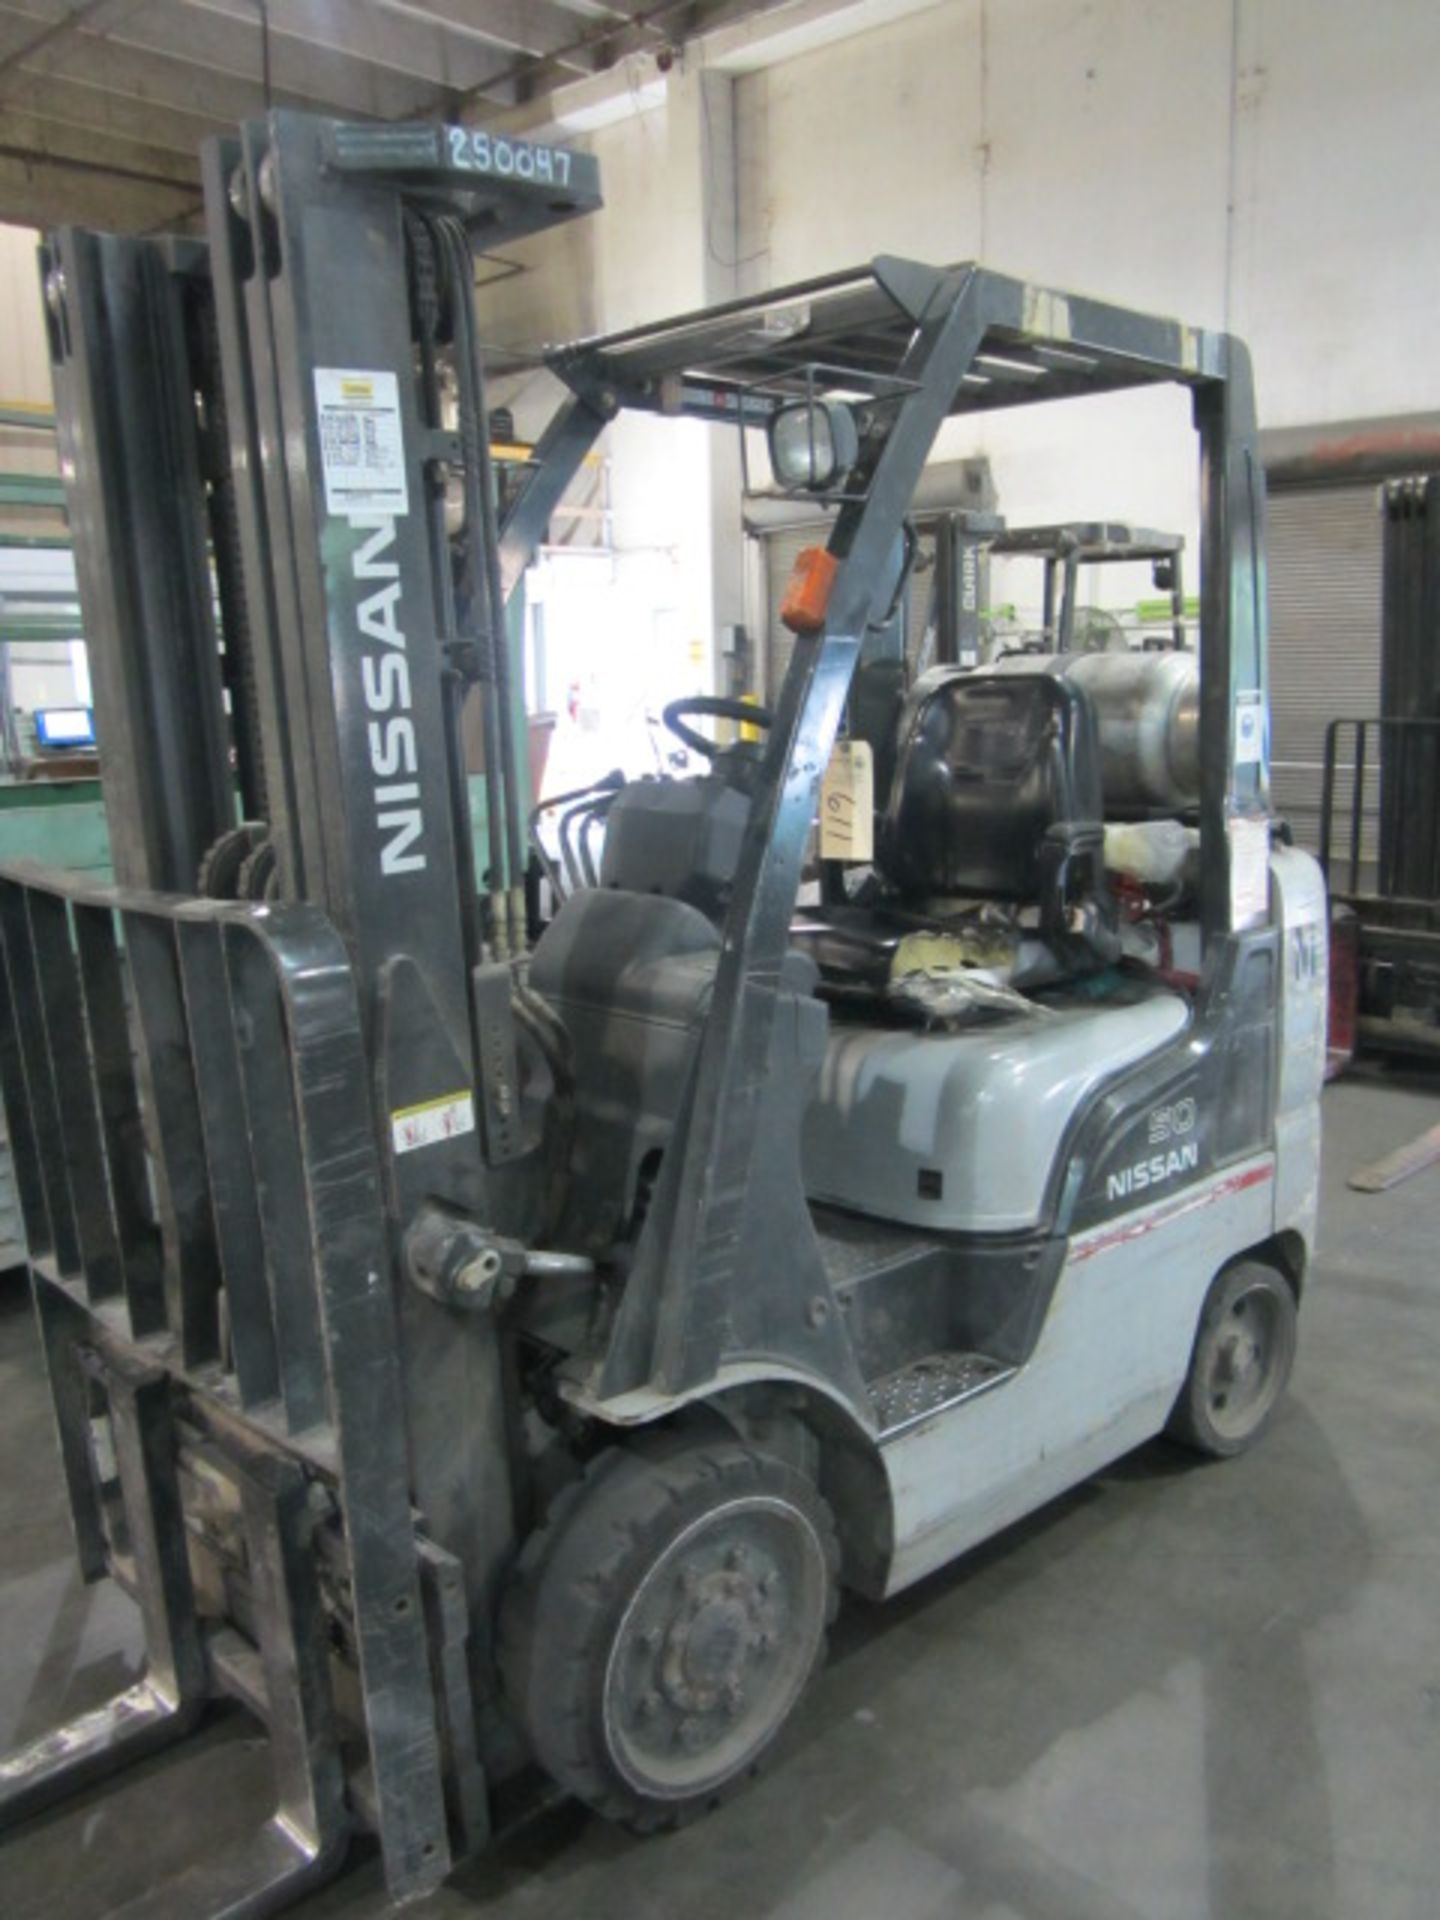 Nissan 50 4400lb Propane Forklift with 3-Stage Mast, Sideshift, sn:CPL02-9P2424 - Image 3 of 7